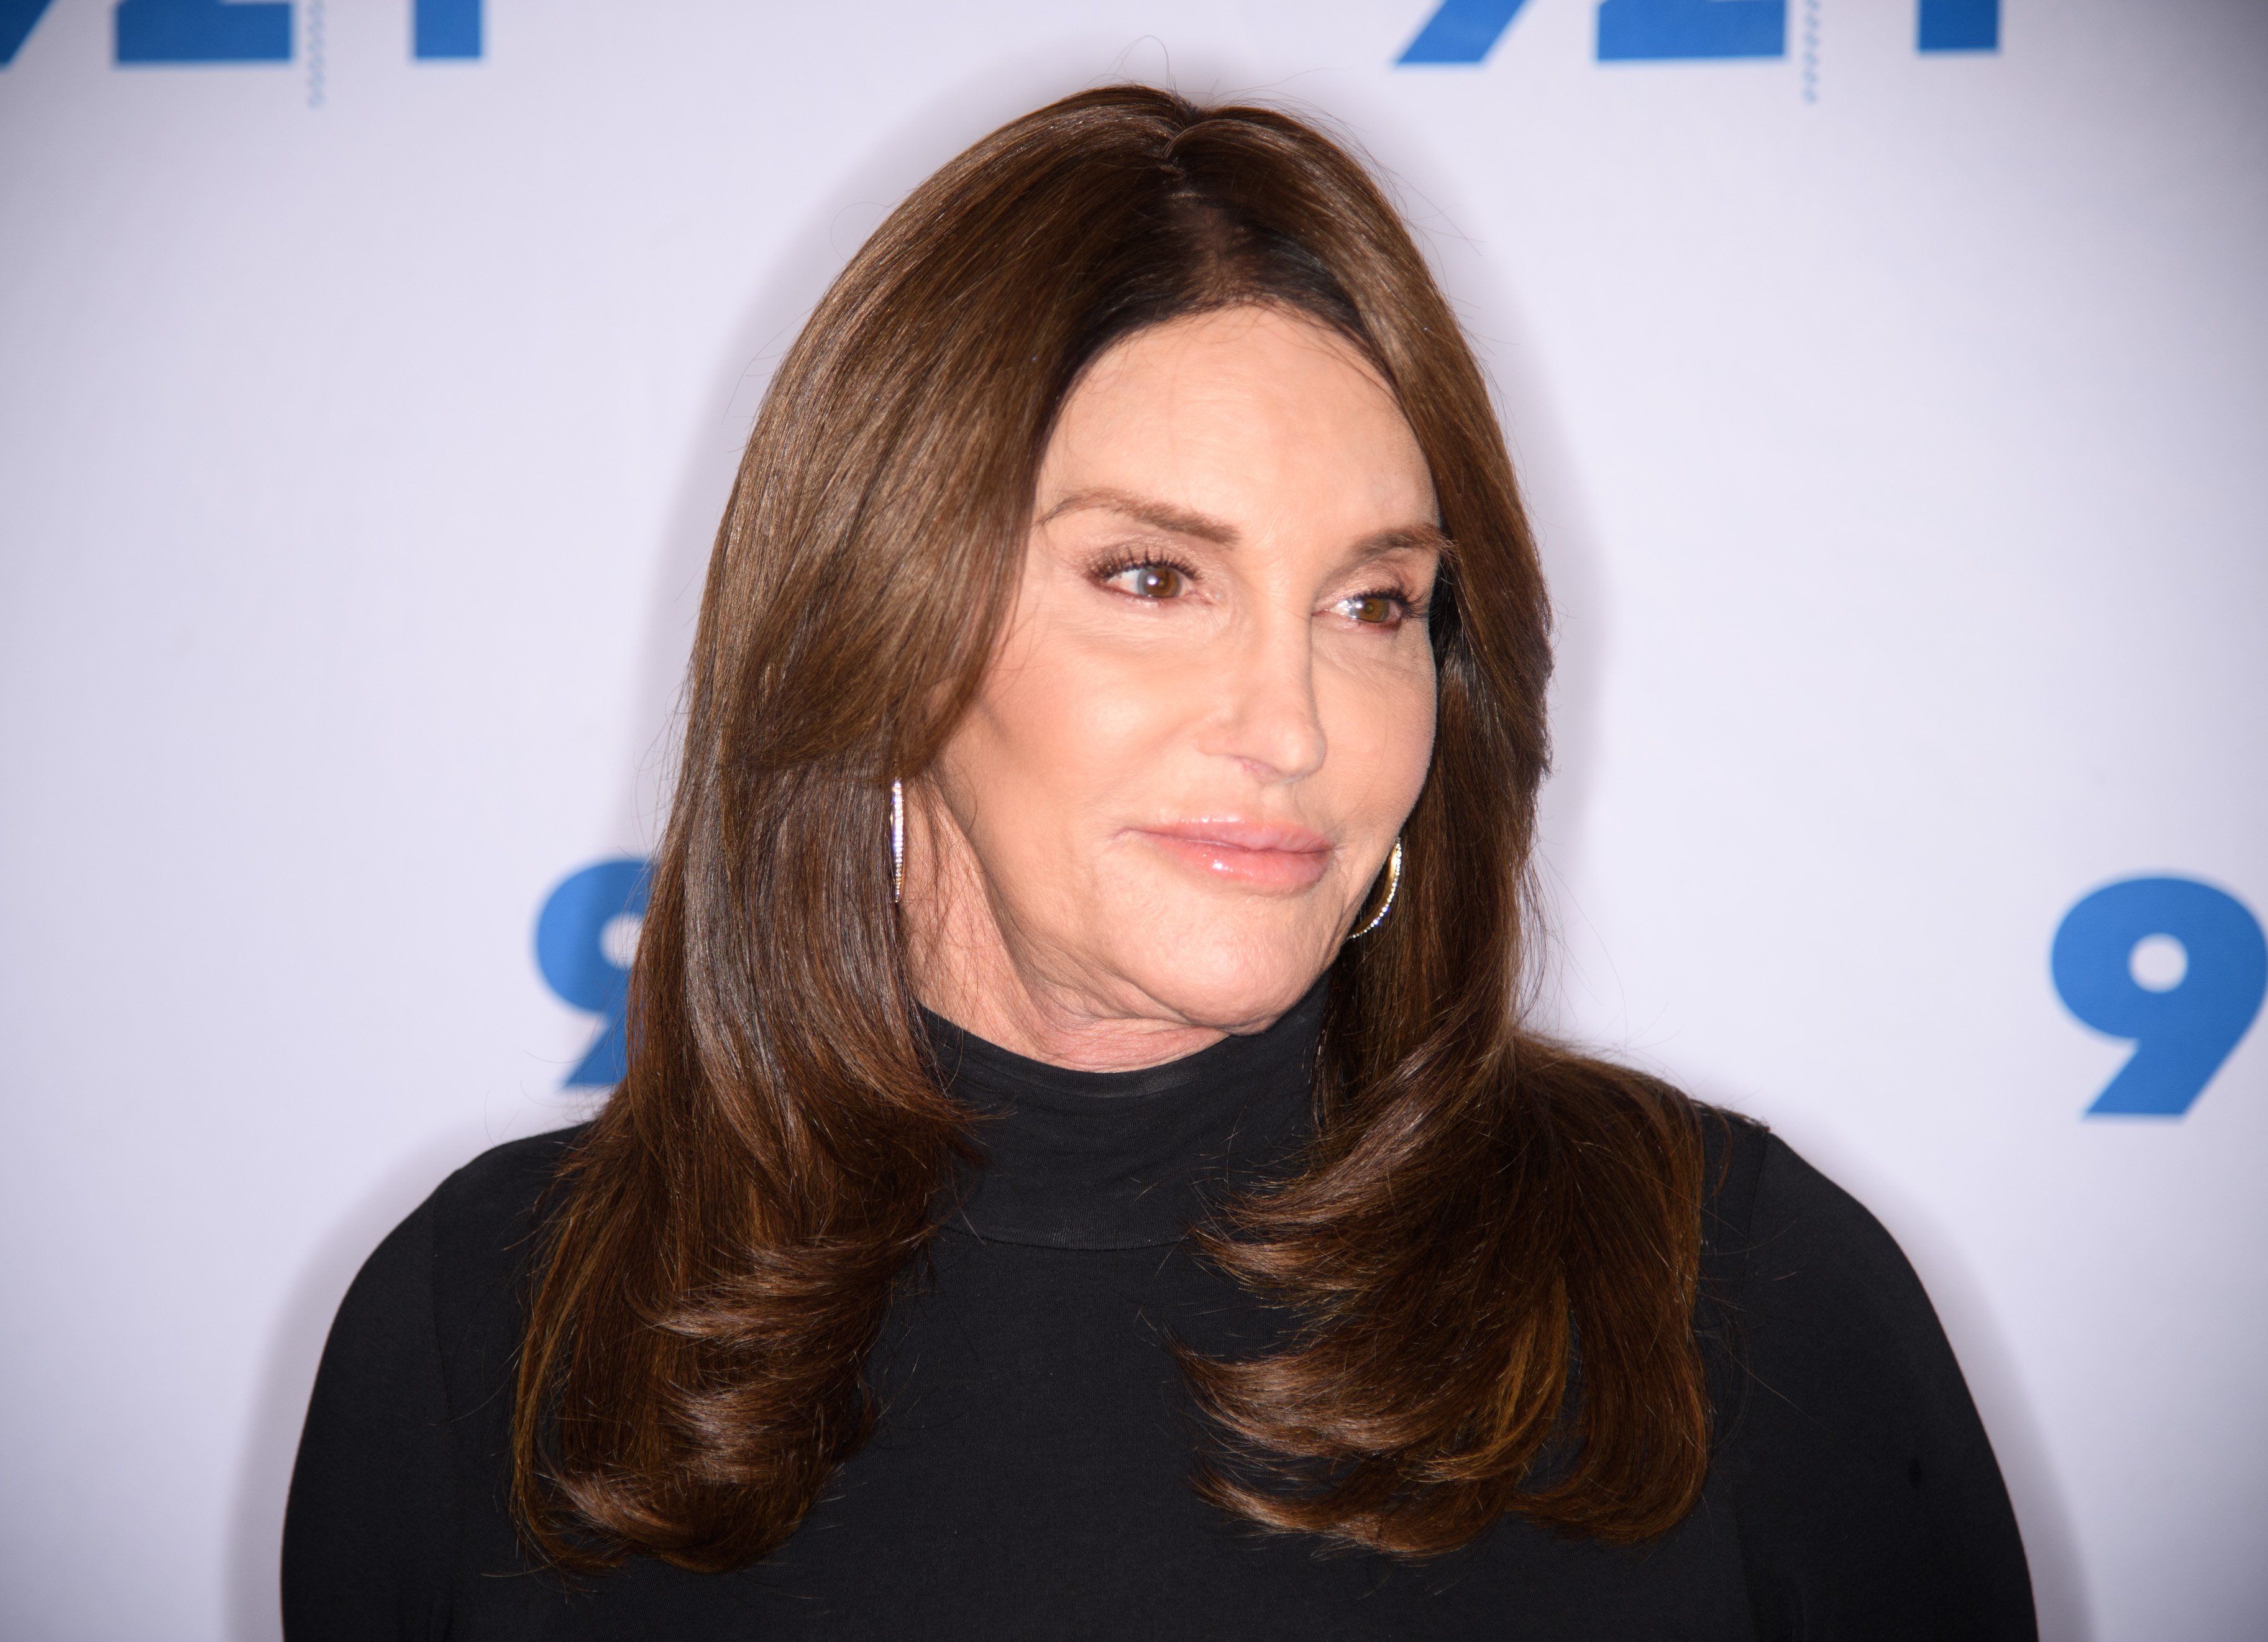 Caitlyn Jenner at Transgender Identity and Courage event, in New York, April 2017. | Photo: Getty Images.